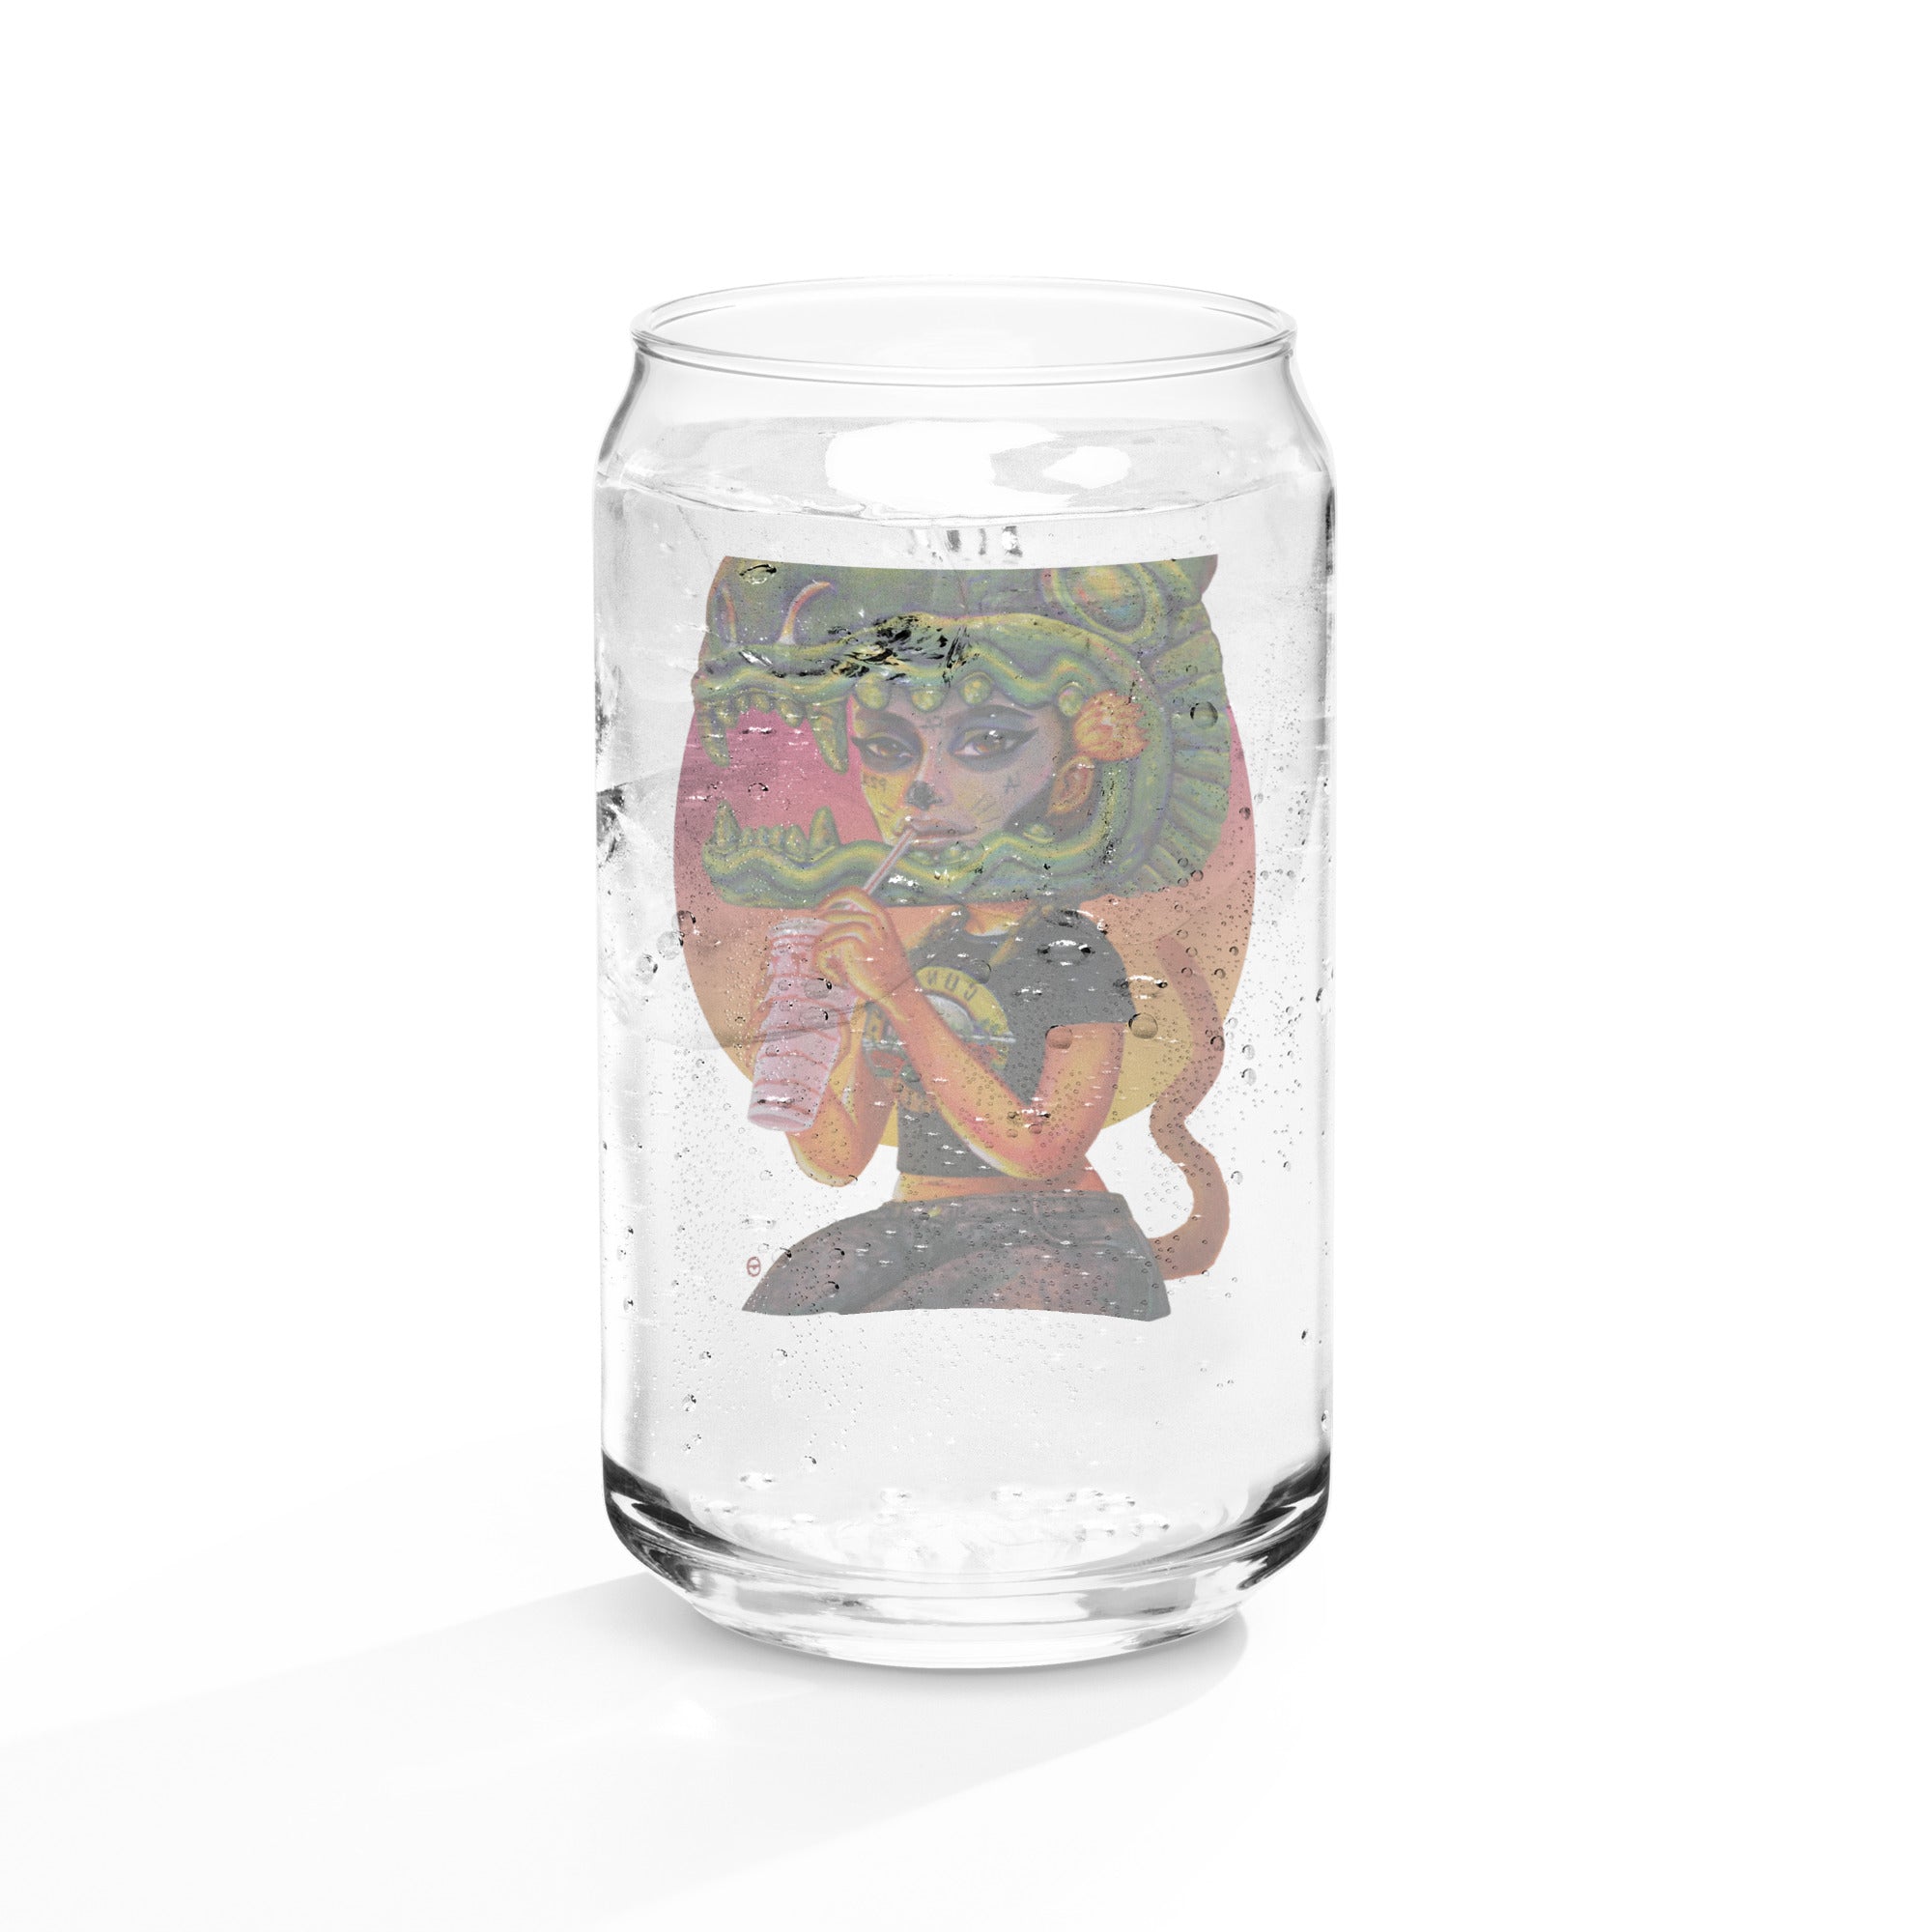 L.A. LIONESS Can-shaped glass